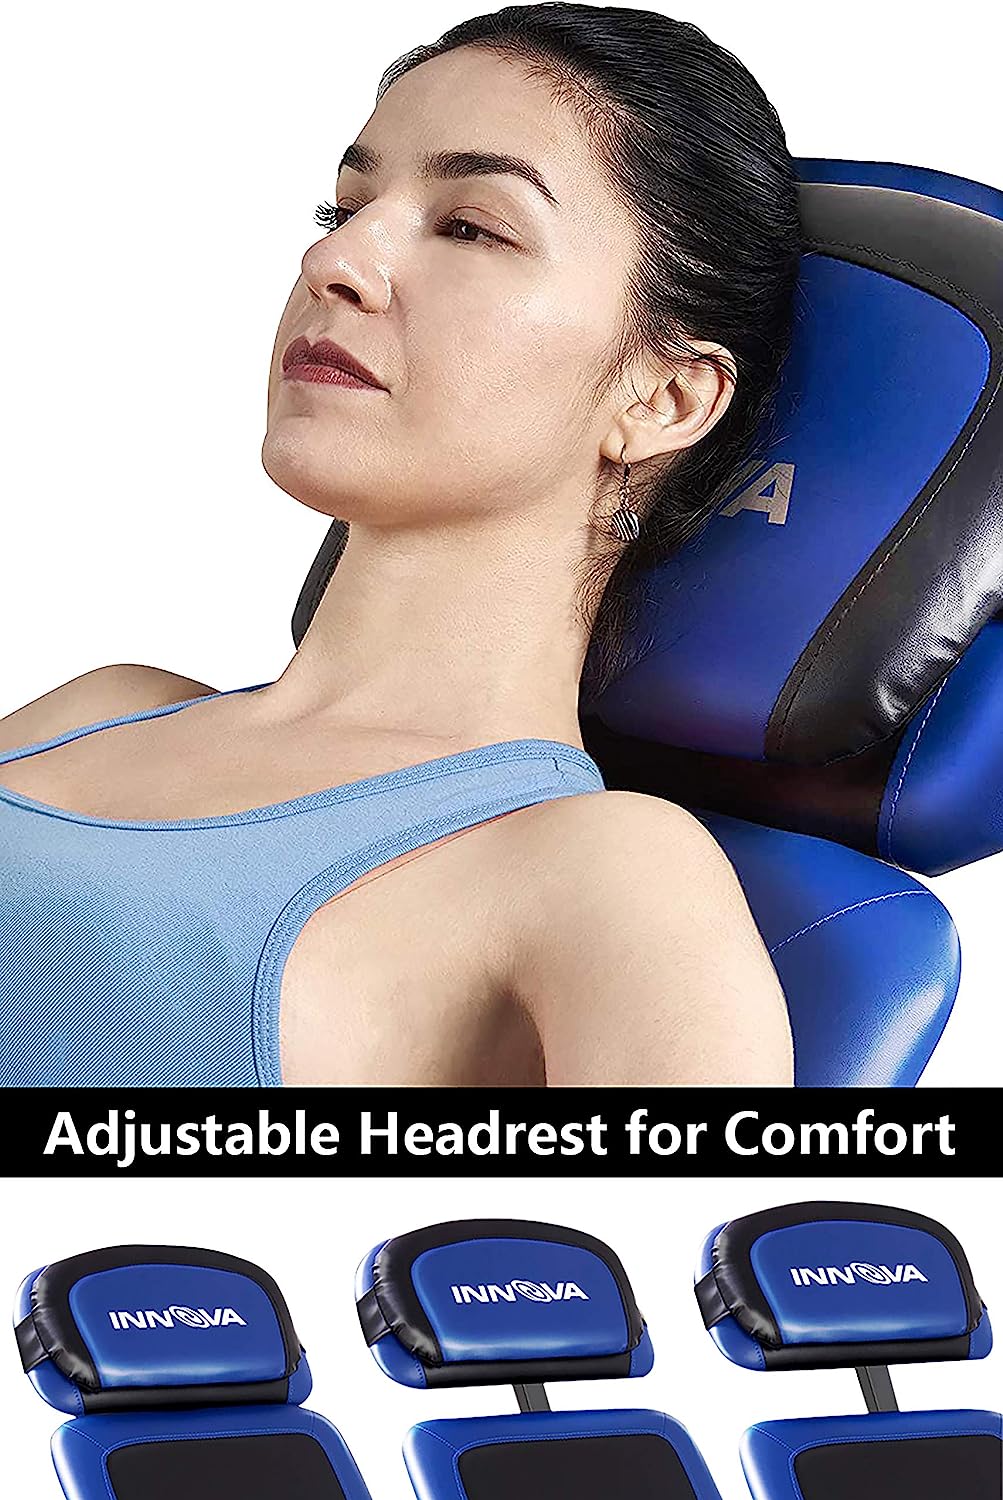 INNOVA HEALTH AND FITNESS Advanced Heat and Massage Inversion Table - $90